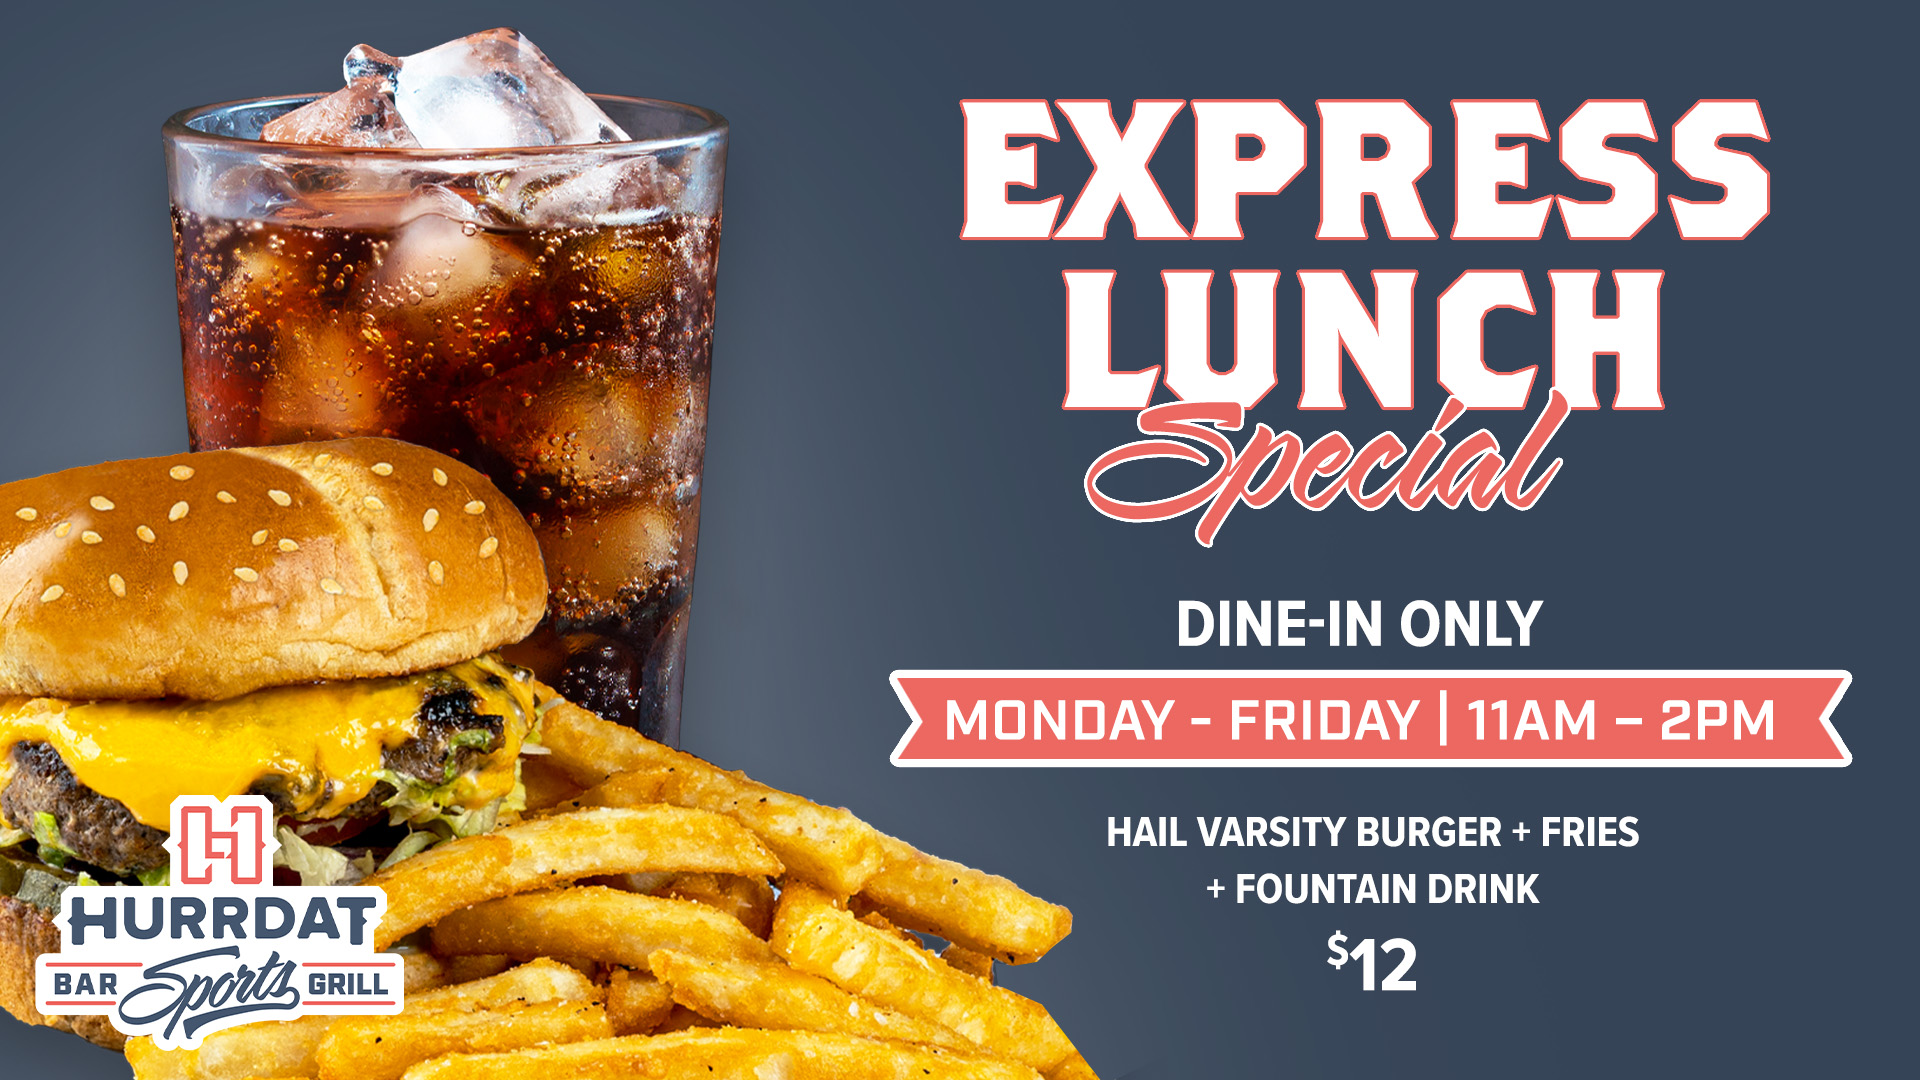 Express Lunch Special